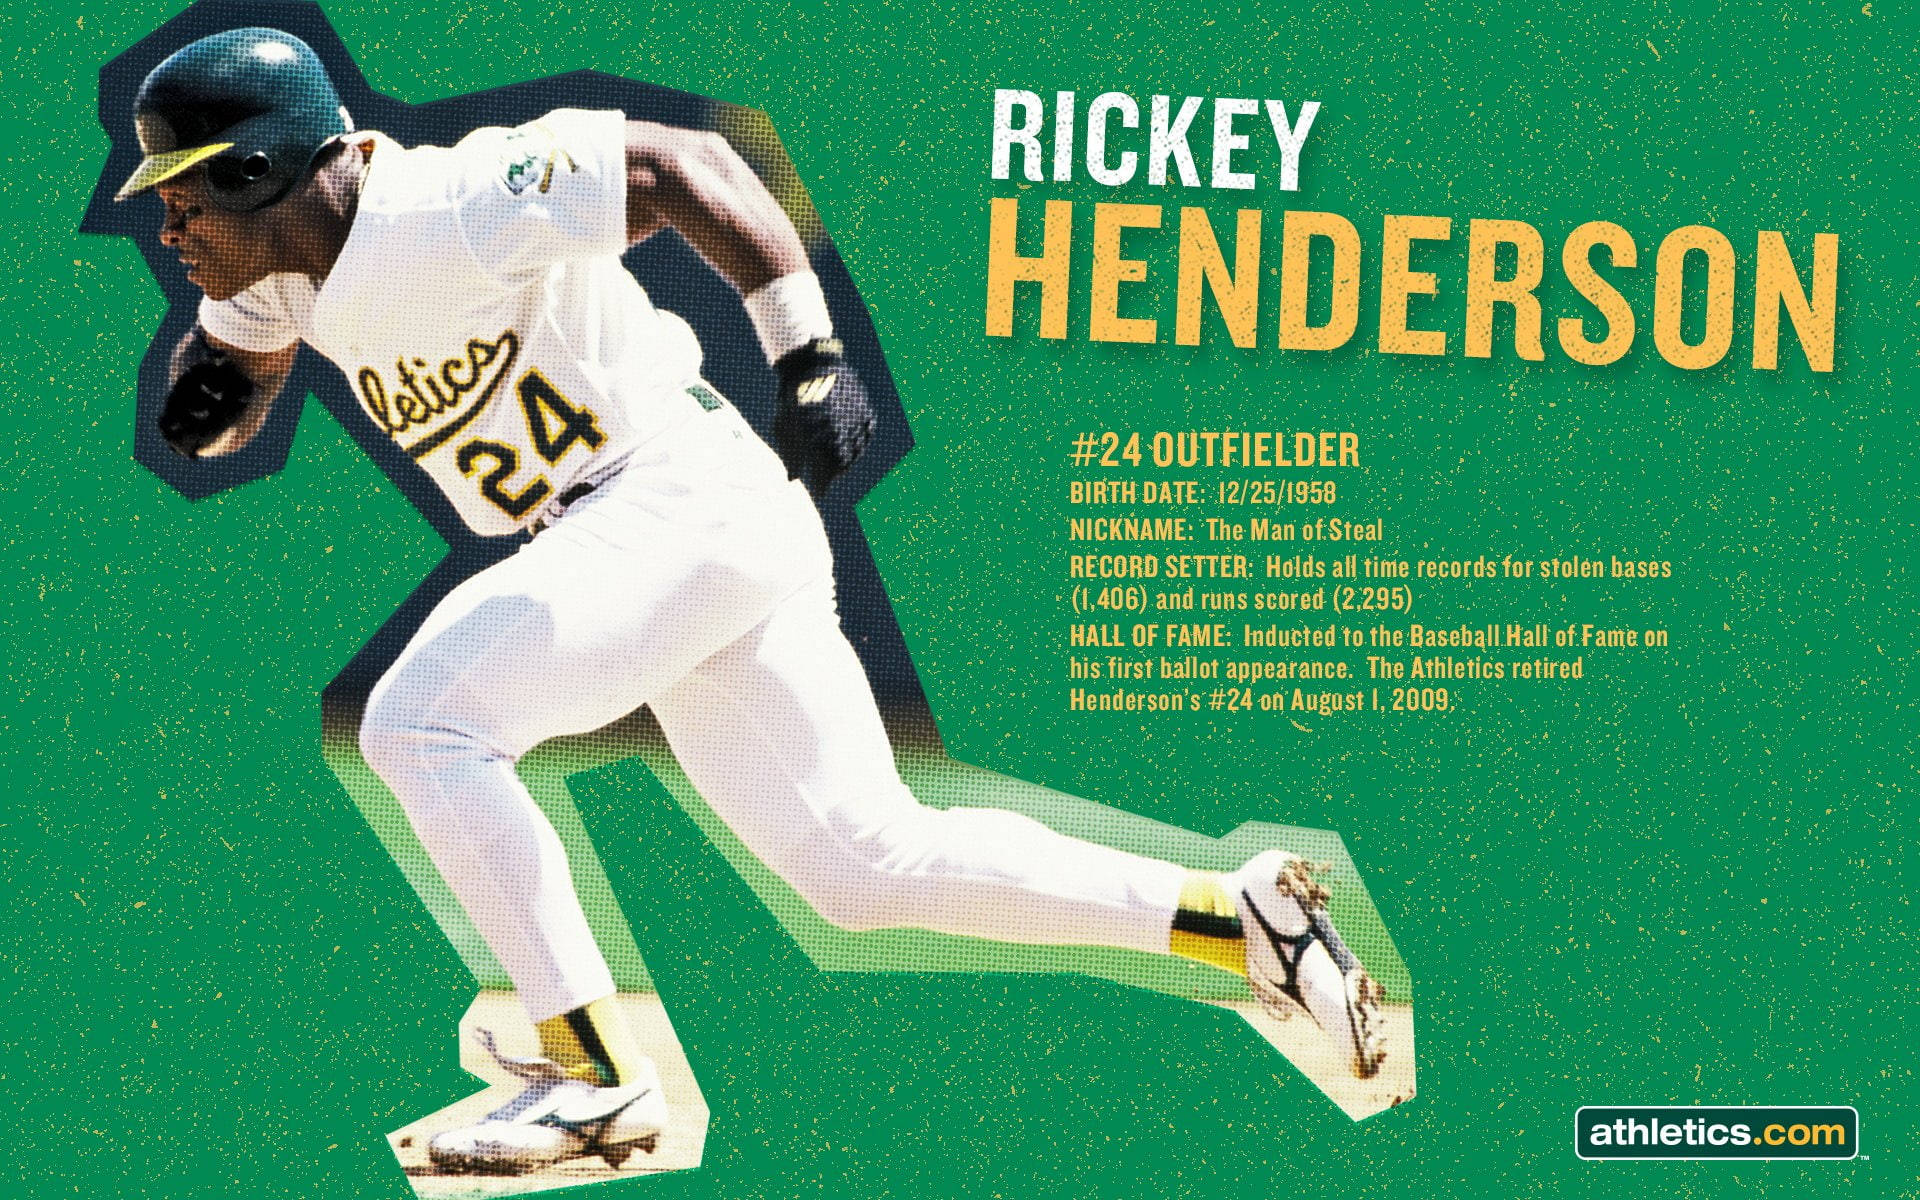 Rickey Henderson wallpaper by Pitin2017 - Download on ZEDGE™